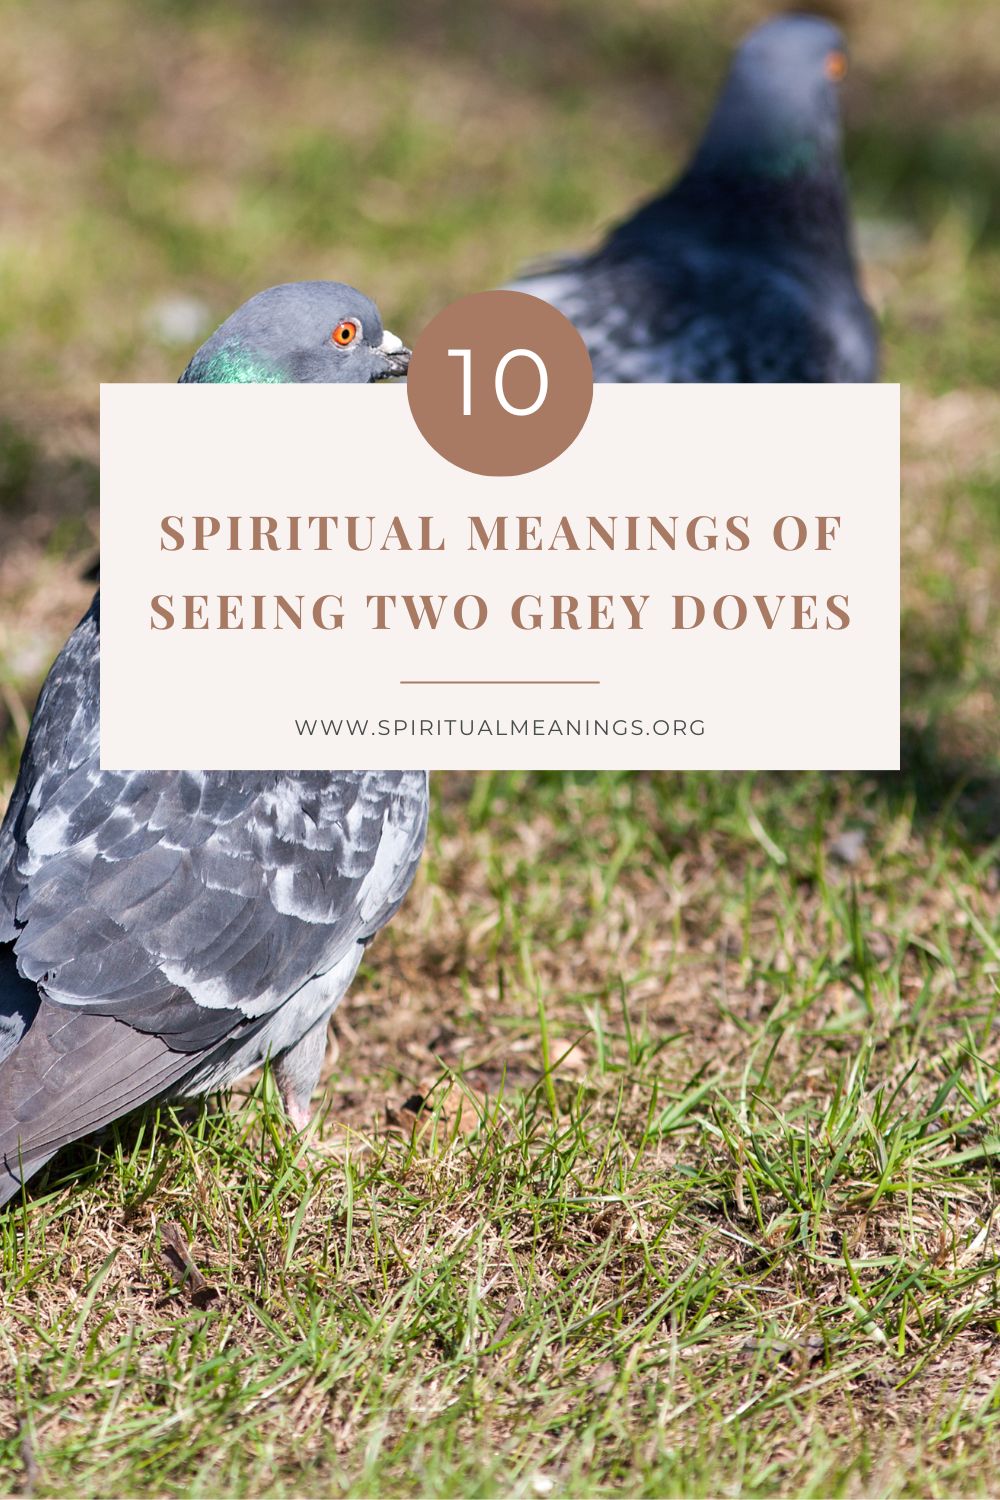 Spiritual Meanings of Seeing Two Grey Doves